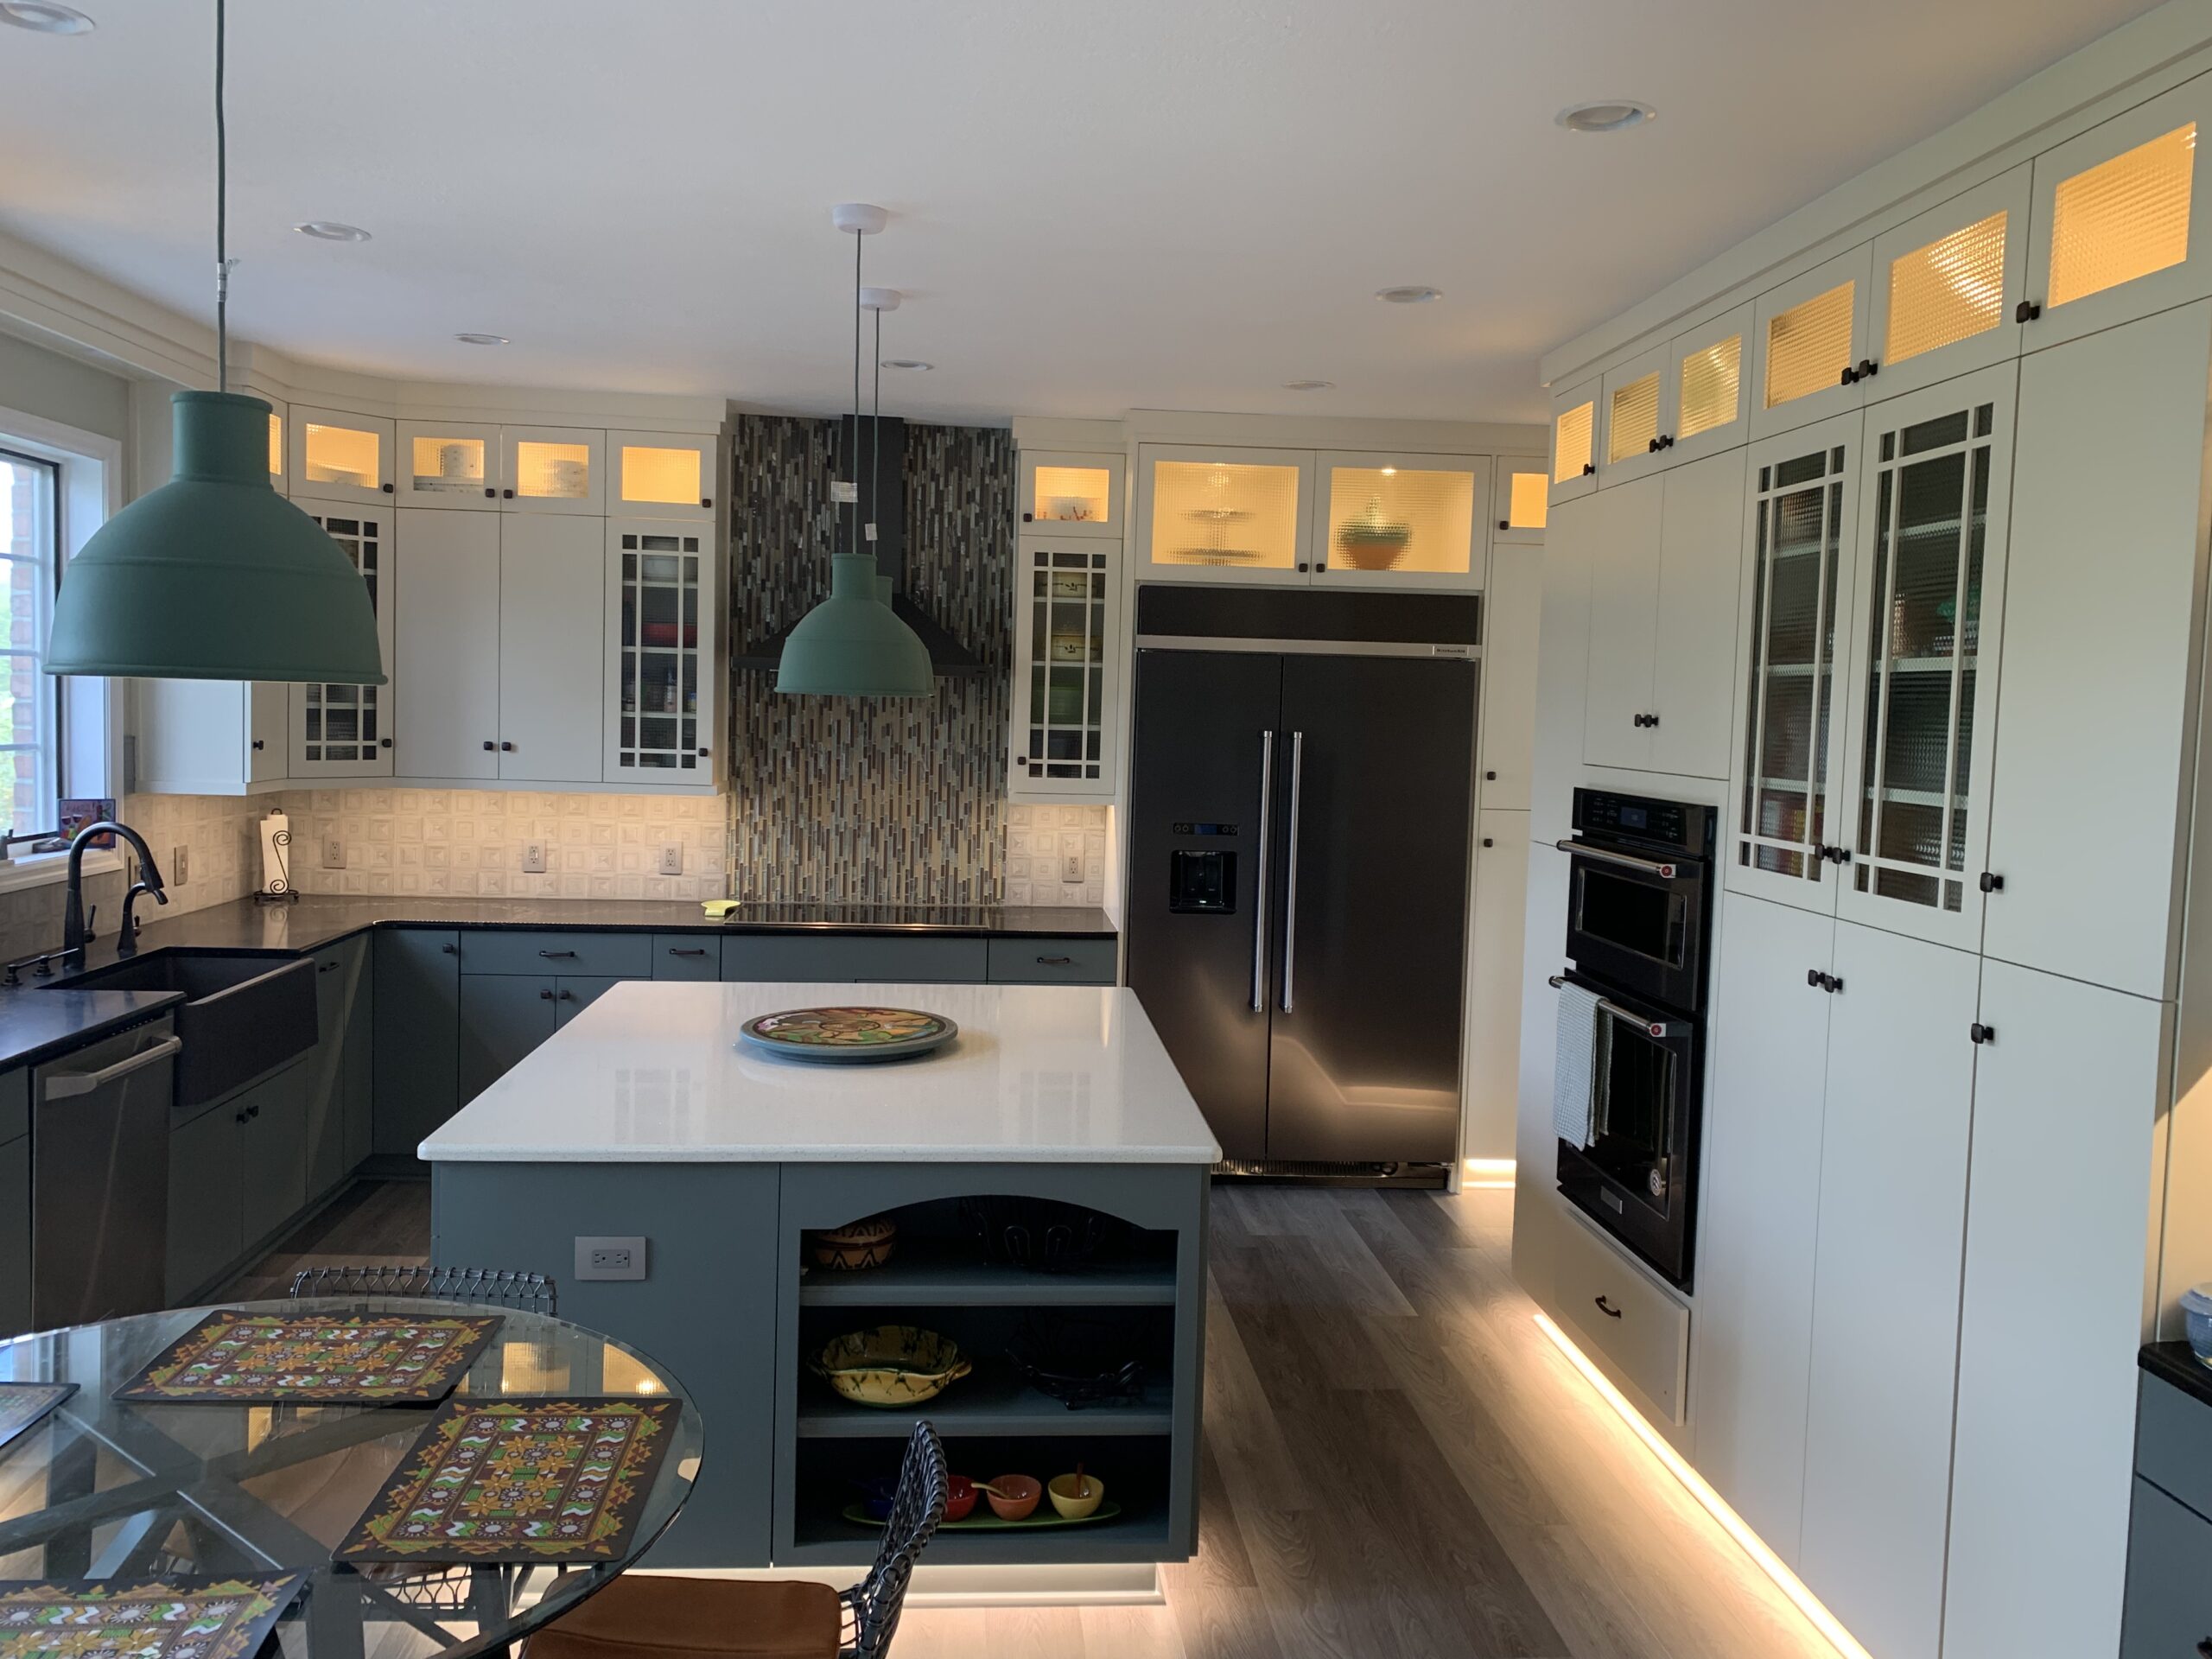 Modern blue kitchen remodeling, square island with storage and white marble countertop, black marble counter, blue base cabinets, white closet storage, black and white tile backsplash, island and cabinet floor lighting